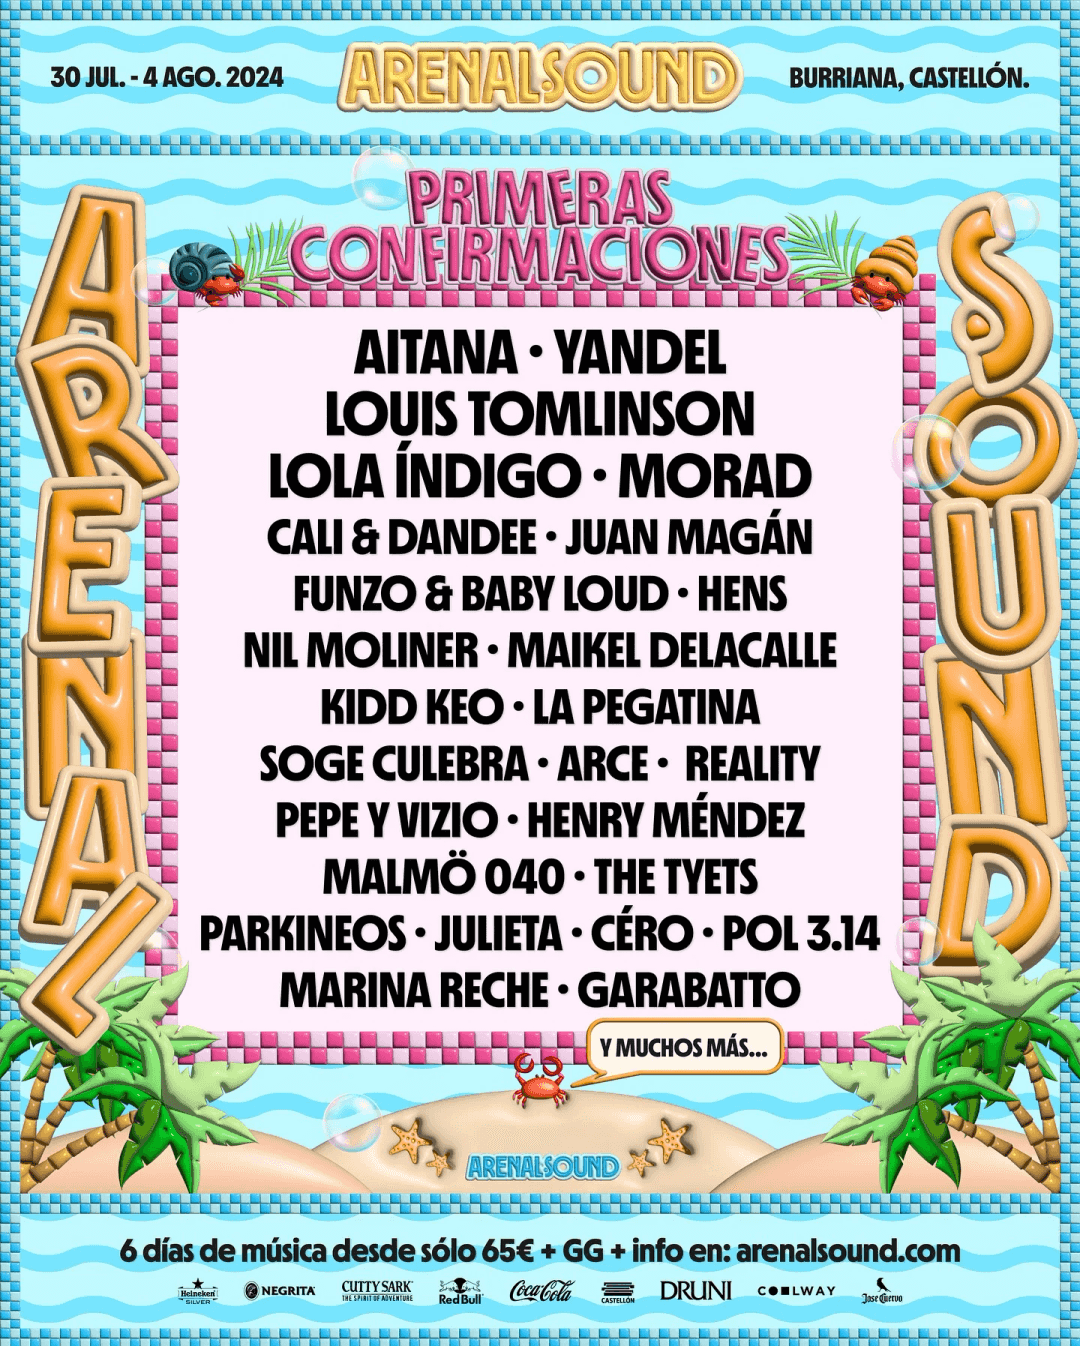 Arenal Sound 2024 in Madrid